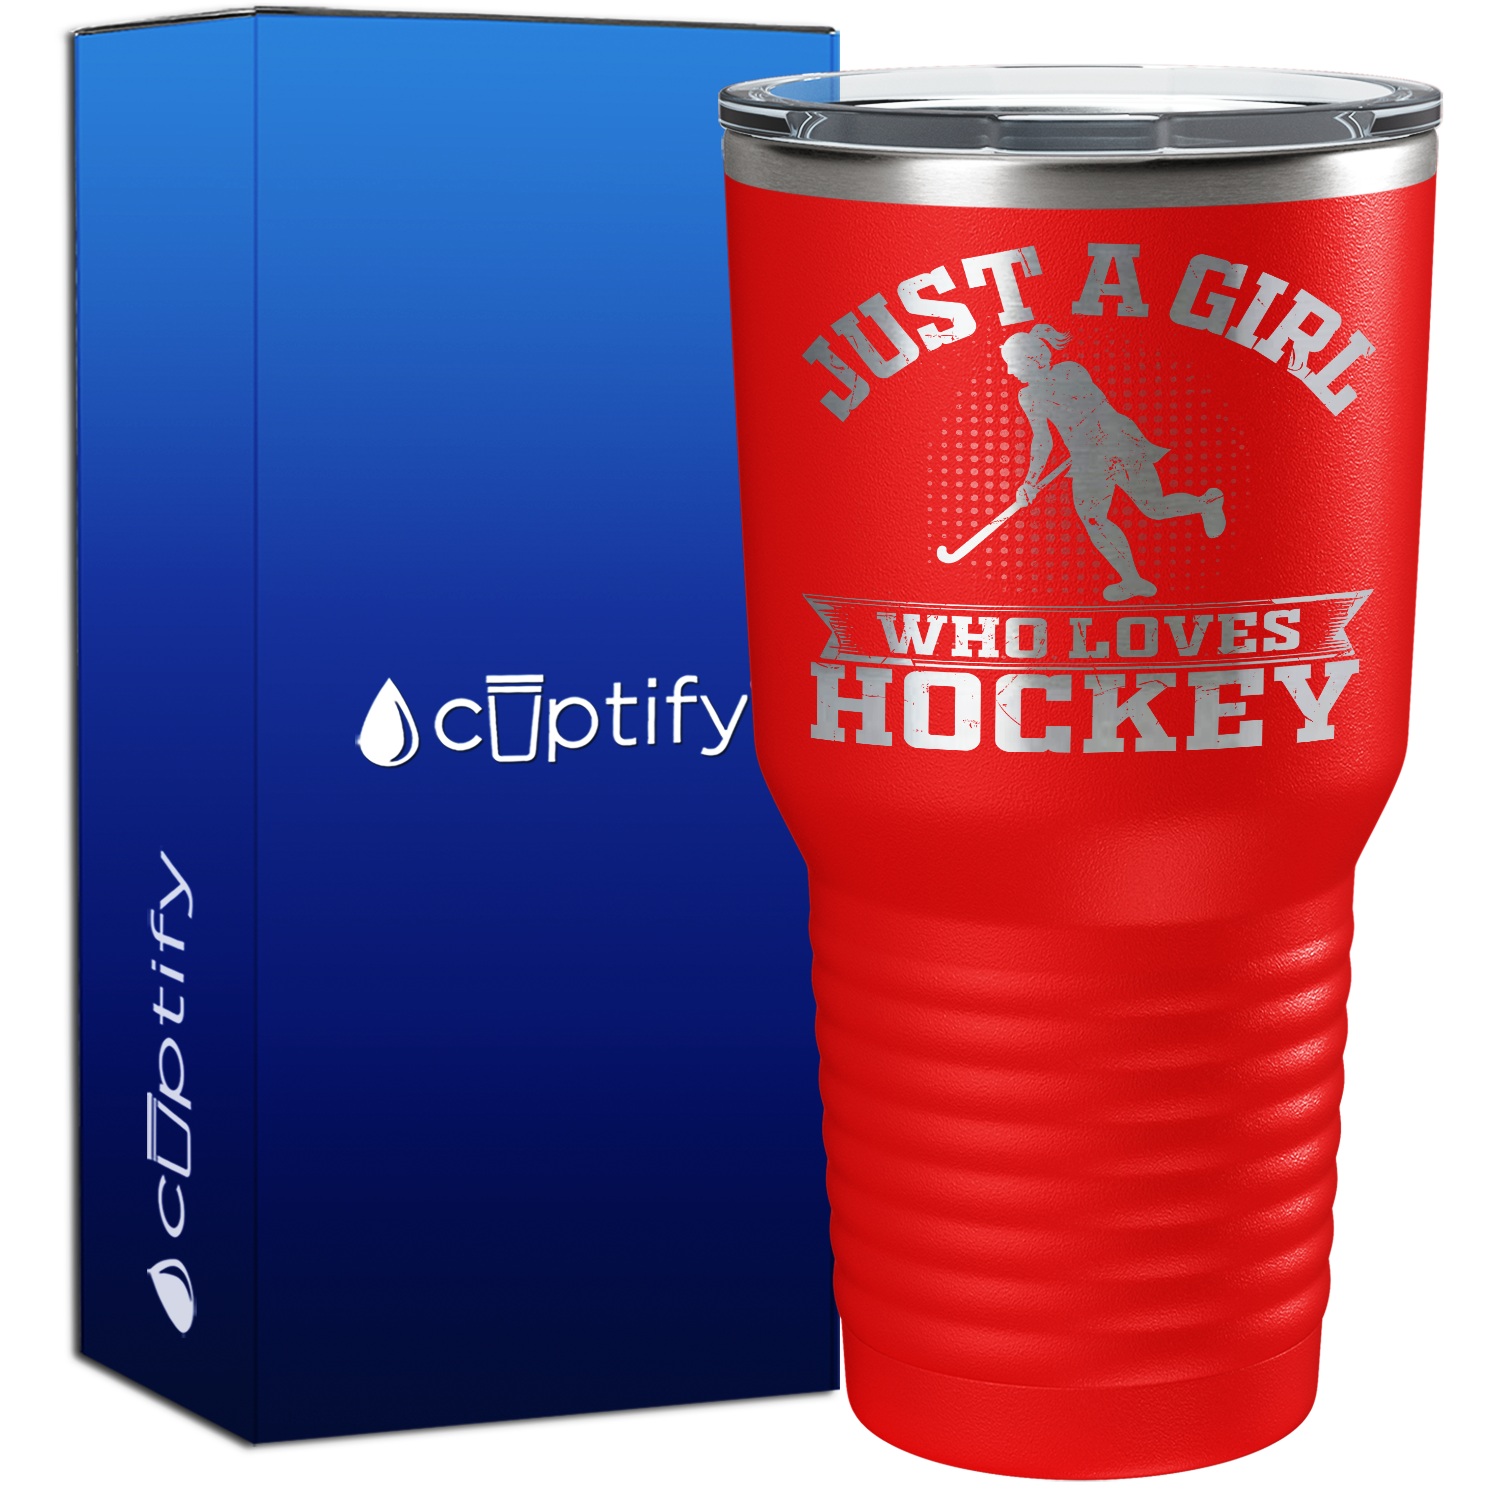 Just a Girl Who Loves Hockey Player Silhouette 30oz Hockey Tumbler